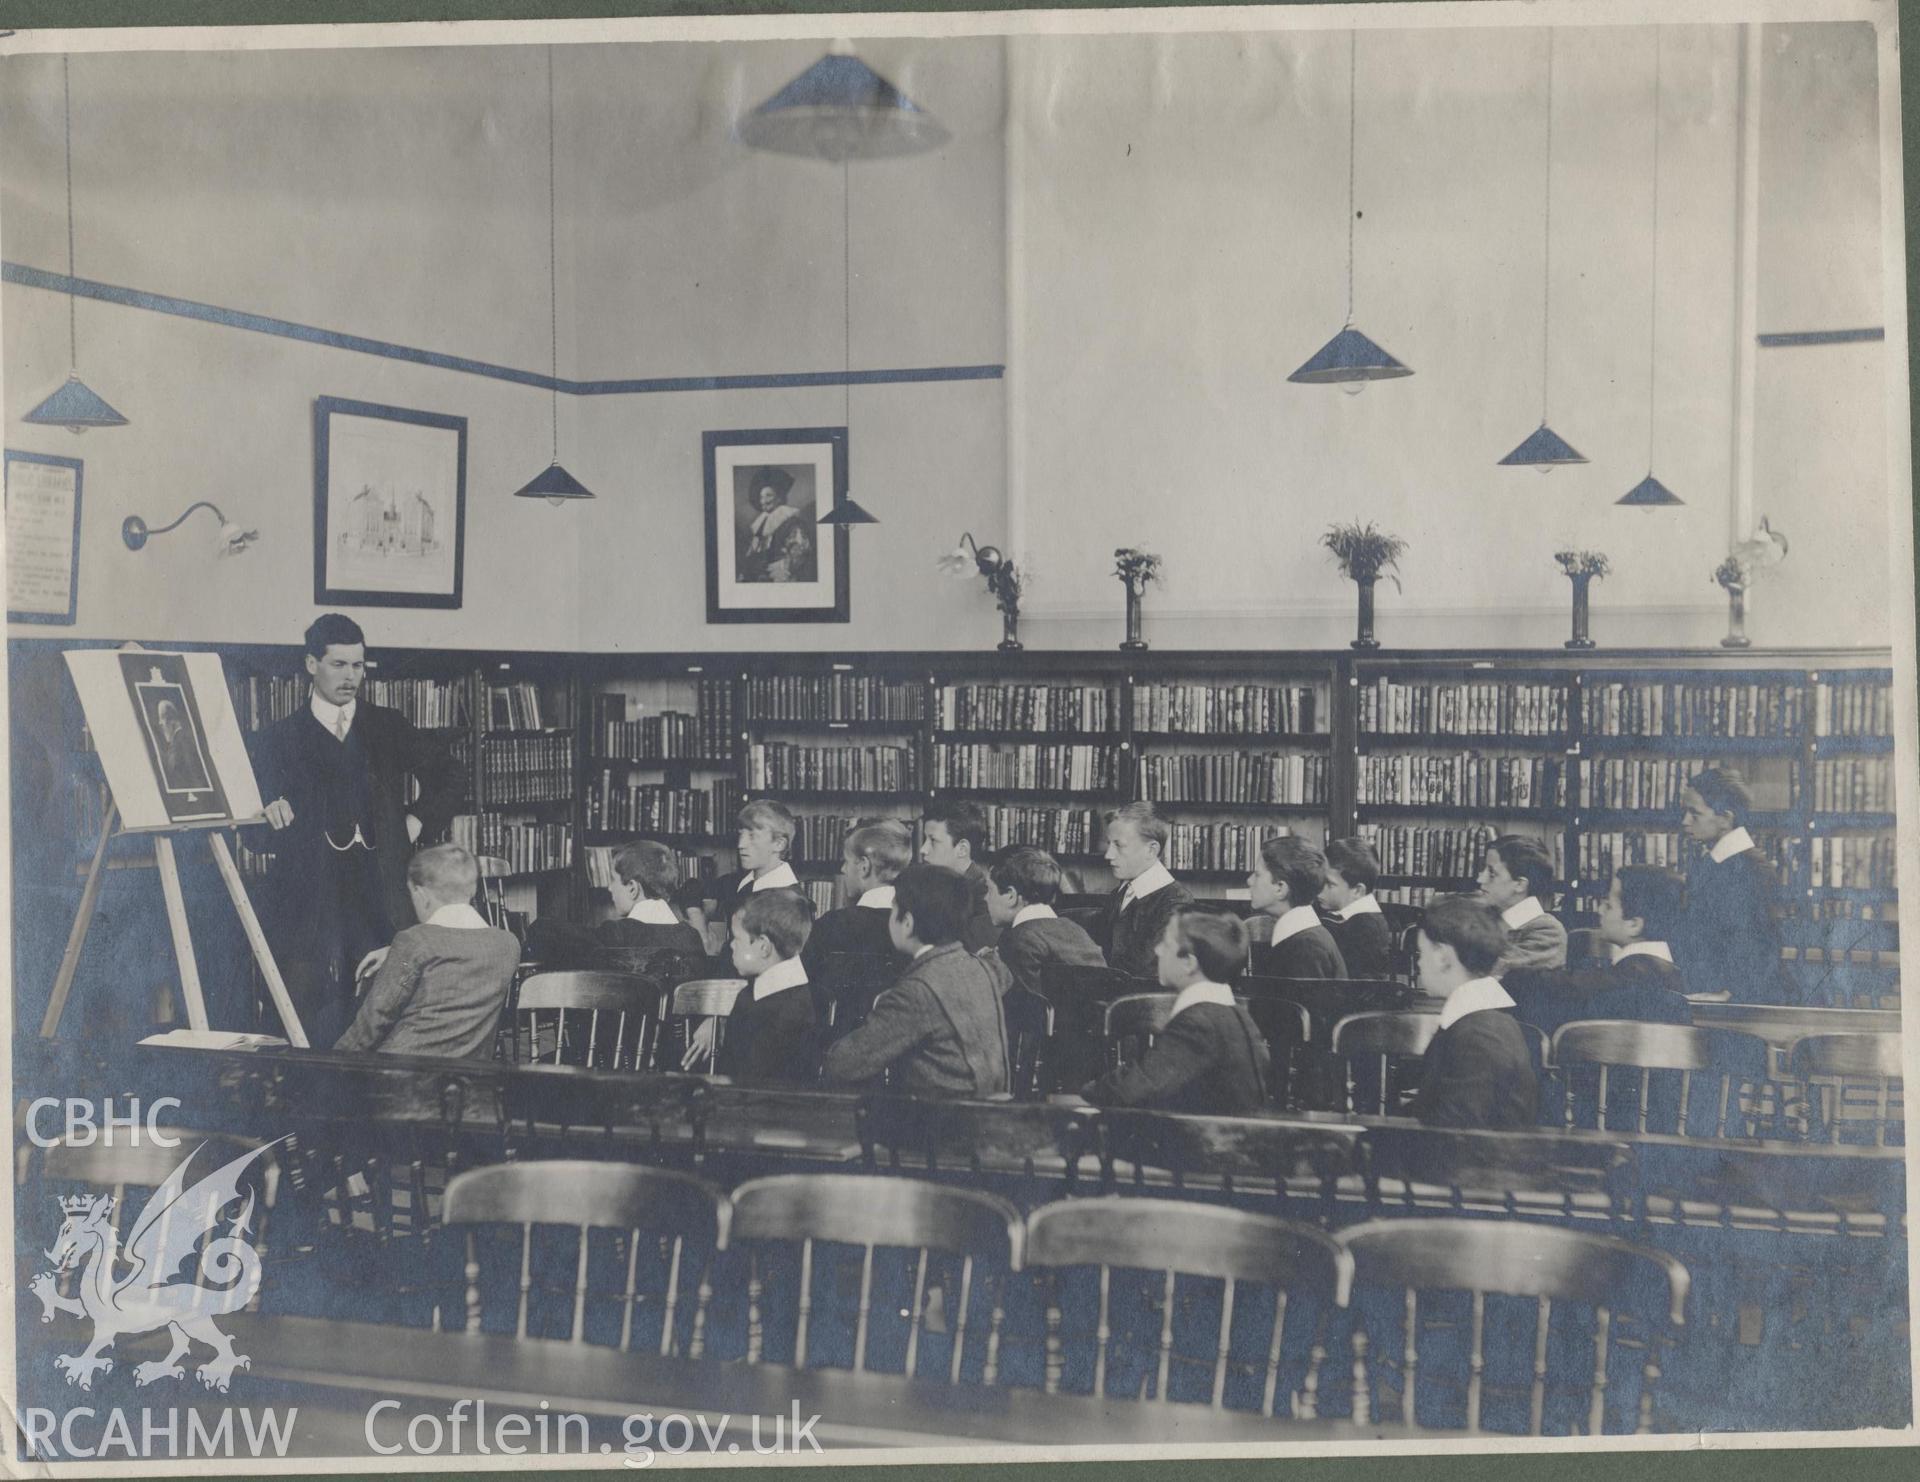 Black and white photograph showing school children working in Cathays Public Library, Cardiff.